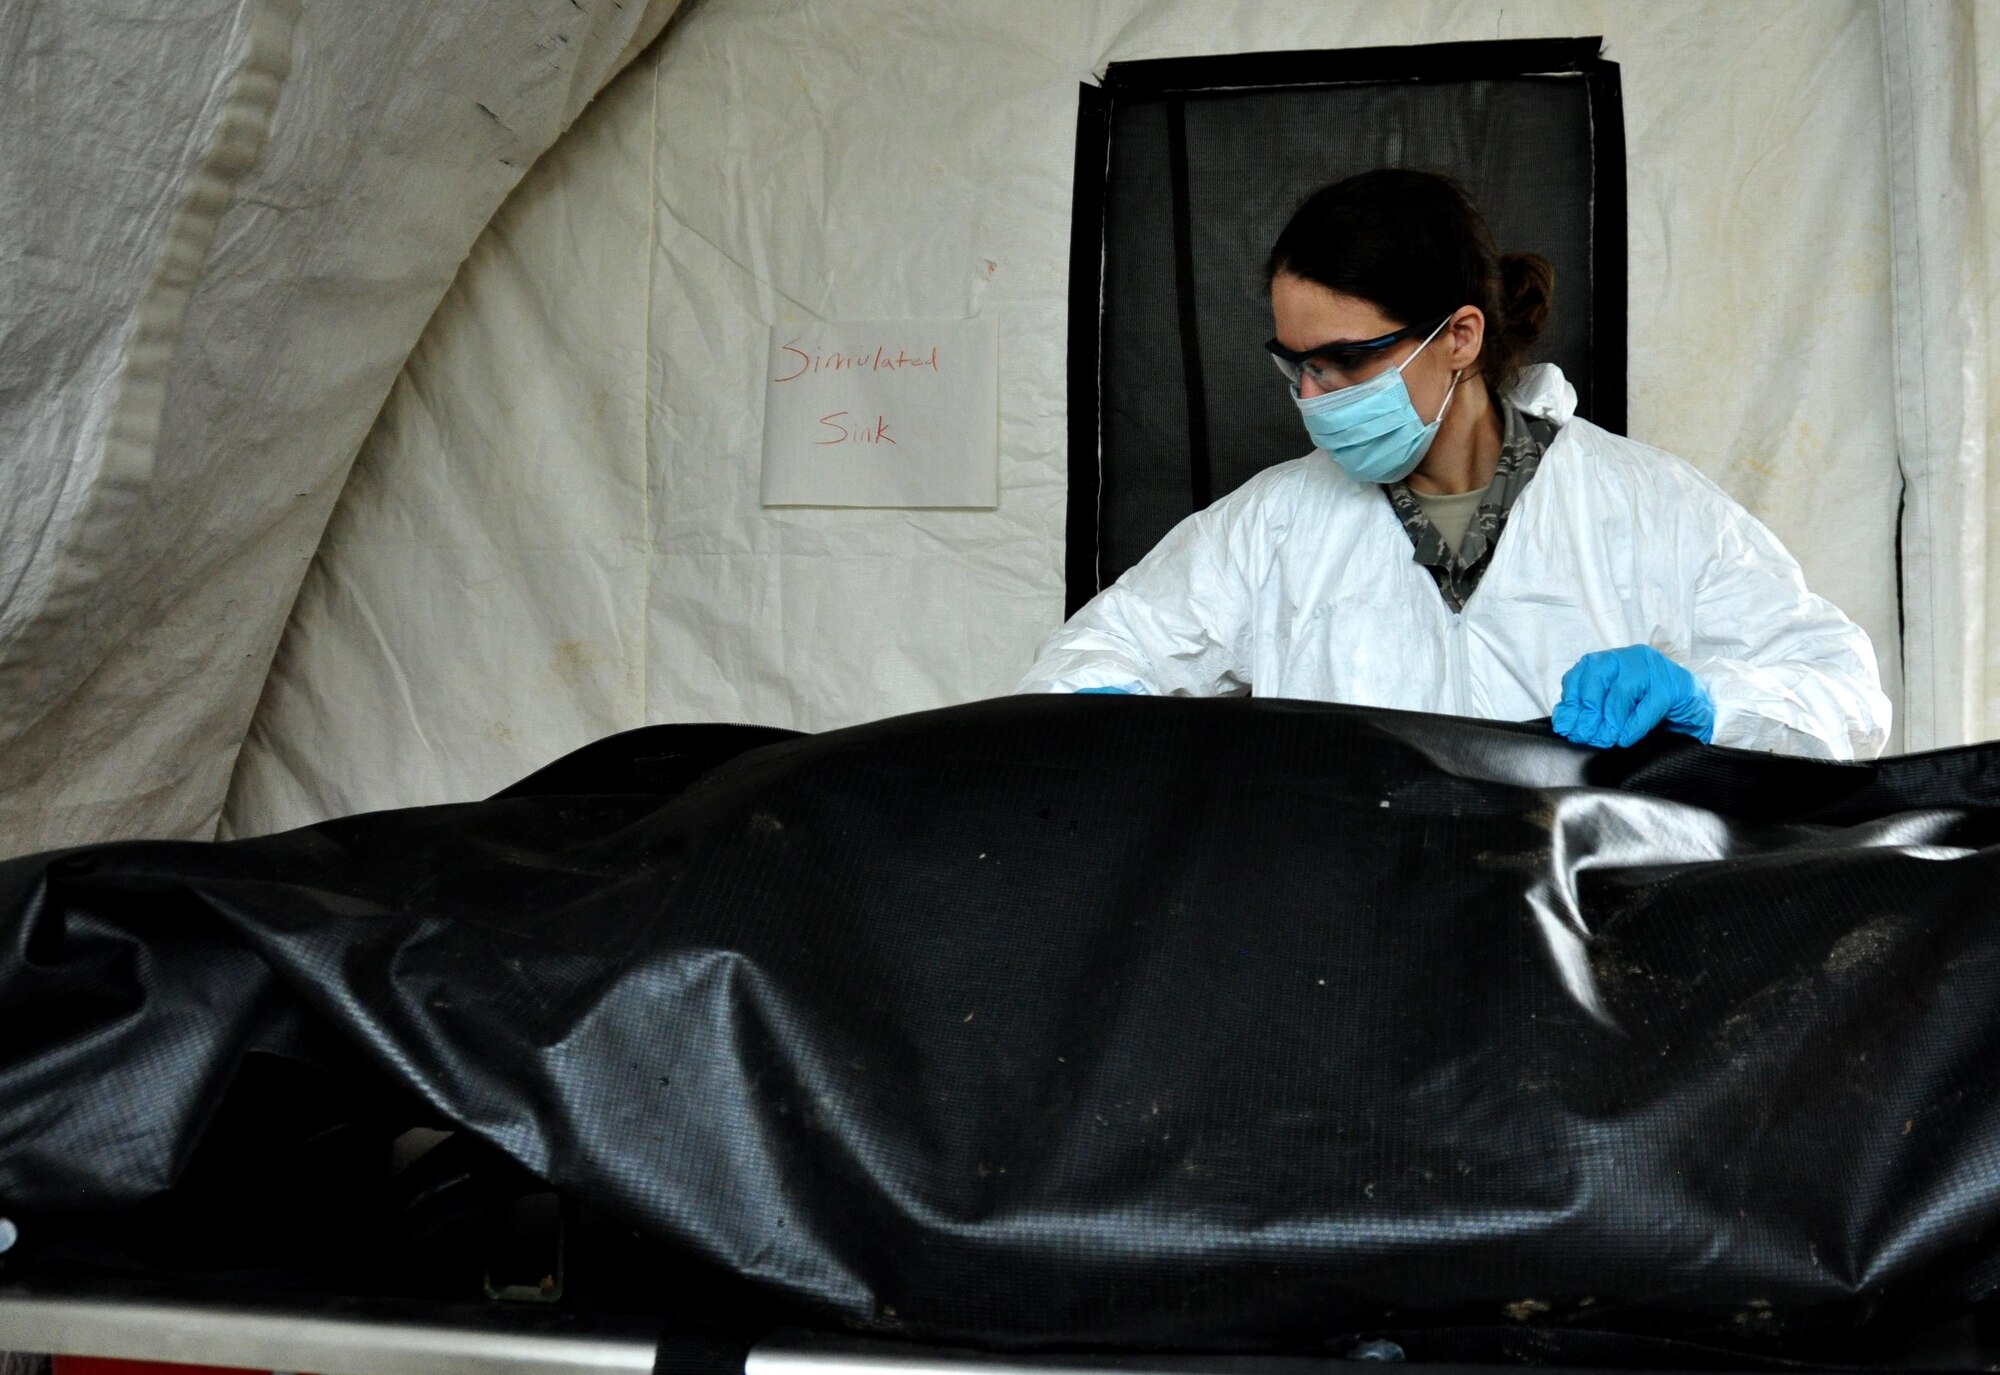 Master Sgt. Nikole Zottola, 911th Force Support Squadron, Pittsburgh, Pa., inspects a casualty dummy during OPERATION Everybody Panic as part of Force Support Silver Flag at Dobbins Air Reserve Base, Ga., March 10, 2015. The challenge consisted of teams competing against each other in nine different events ranging from following a convoy, building tents, fixing Babington burners, cooking meals, planning lodging, planning a base from scratch, driving a forklift and a scavenger hunt. (U.S. Air Force photo/Senior Airman Daniel Phelps)